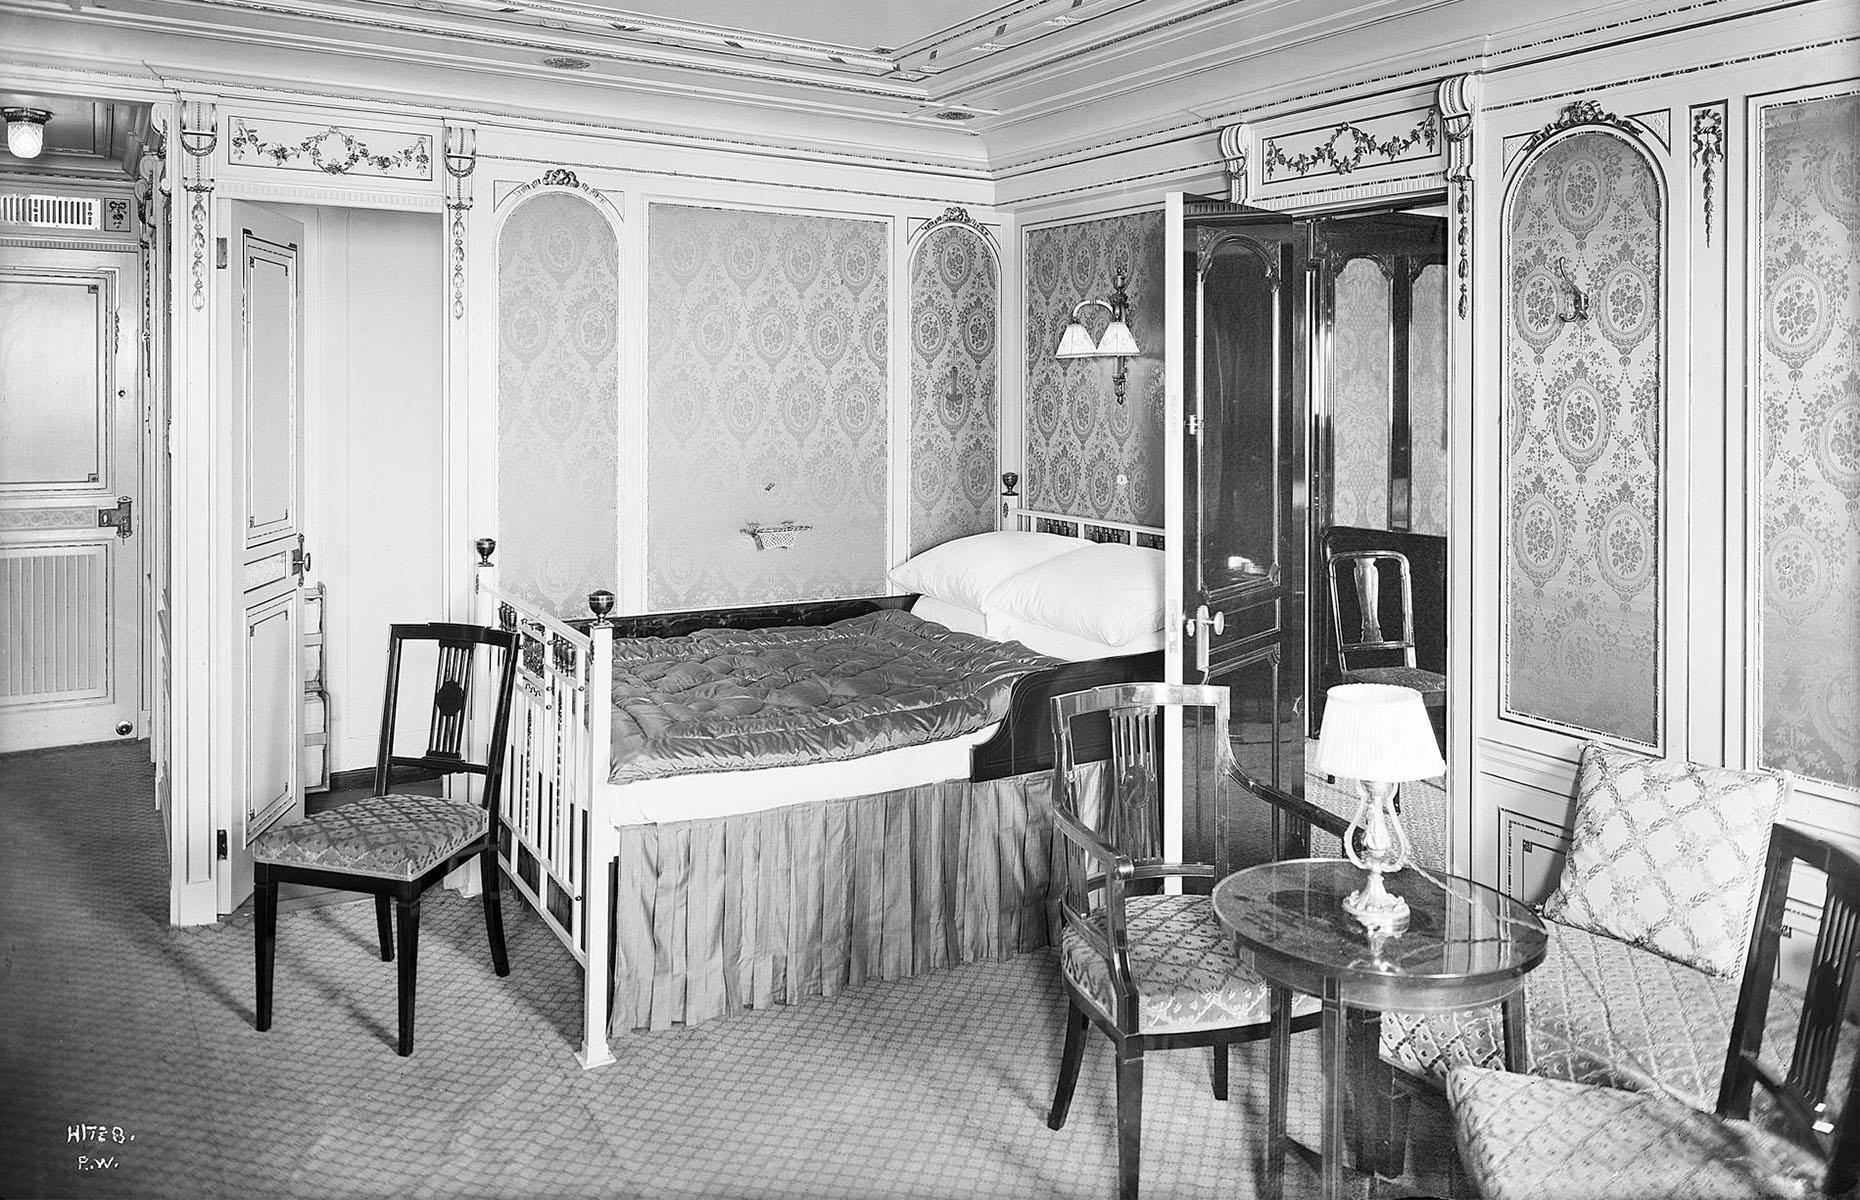 For first-class passengers the upper part of the Titanic was as sumptuously decorated as a high-class hotel. There were lavish staterooms, a grand staircase, a swimming pool, a Turkish bath, a gym, a squash court, leisure rooms and multiple dining rooms all resplendently decorated. Pictured is stateroom B-58 on the Titanic, decorated in Louis XVI style.